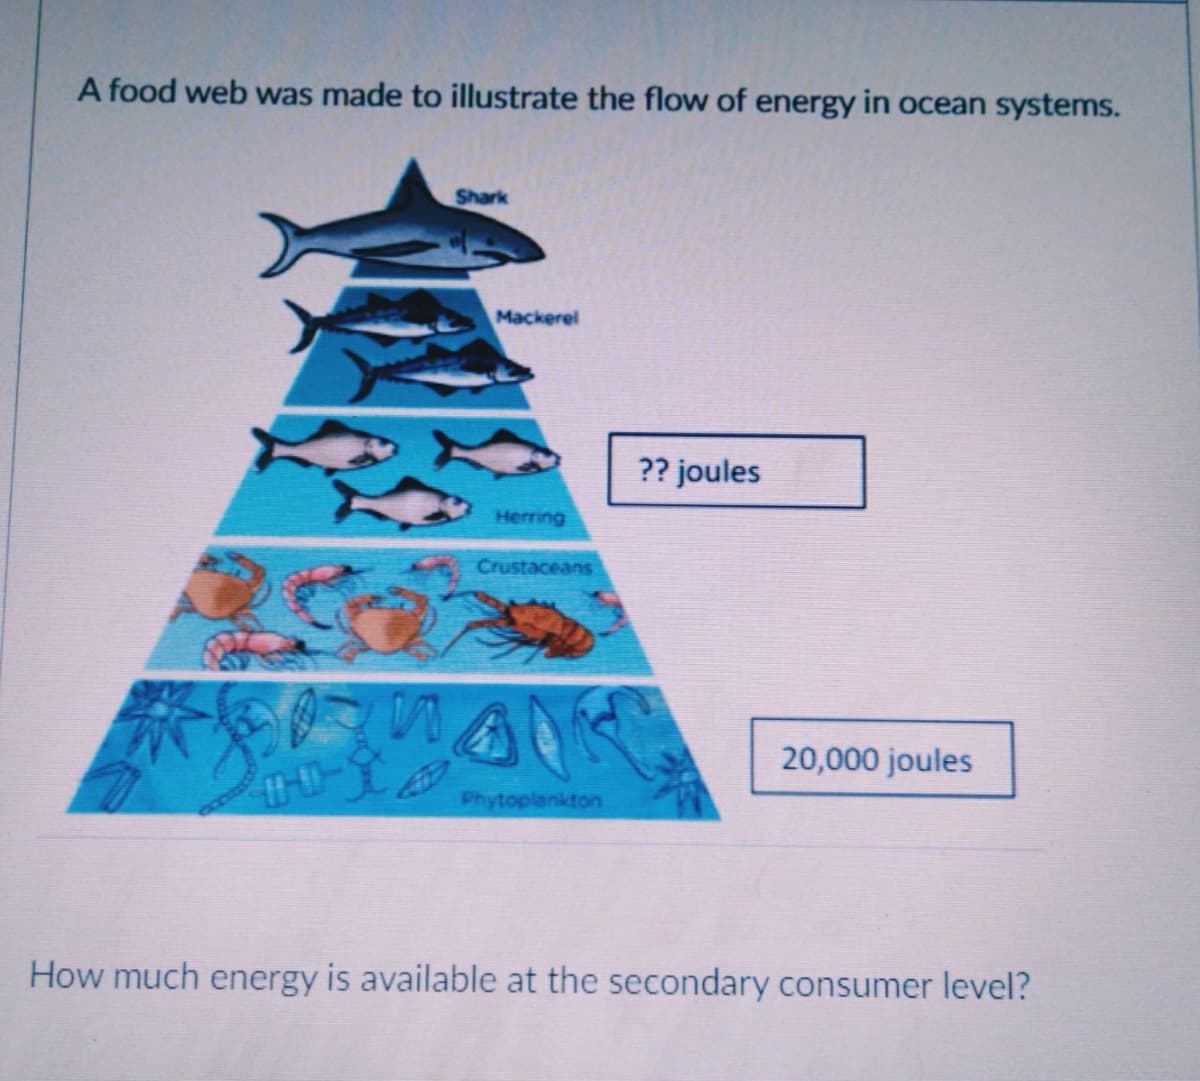 A food web was made to illustrate the flow of energy in ocean systems.
Shark
Mackerel
?? joules
Herring
Crustaceans
20,000 joules
Phytoplankton
How much energy is available at the secondary consumer level?
